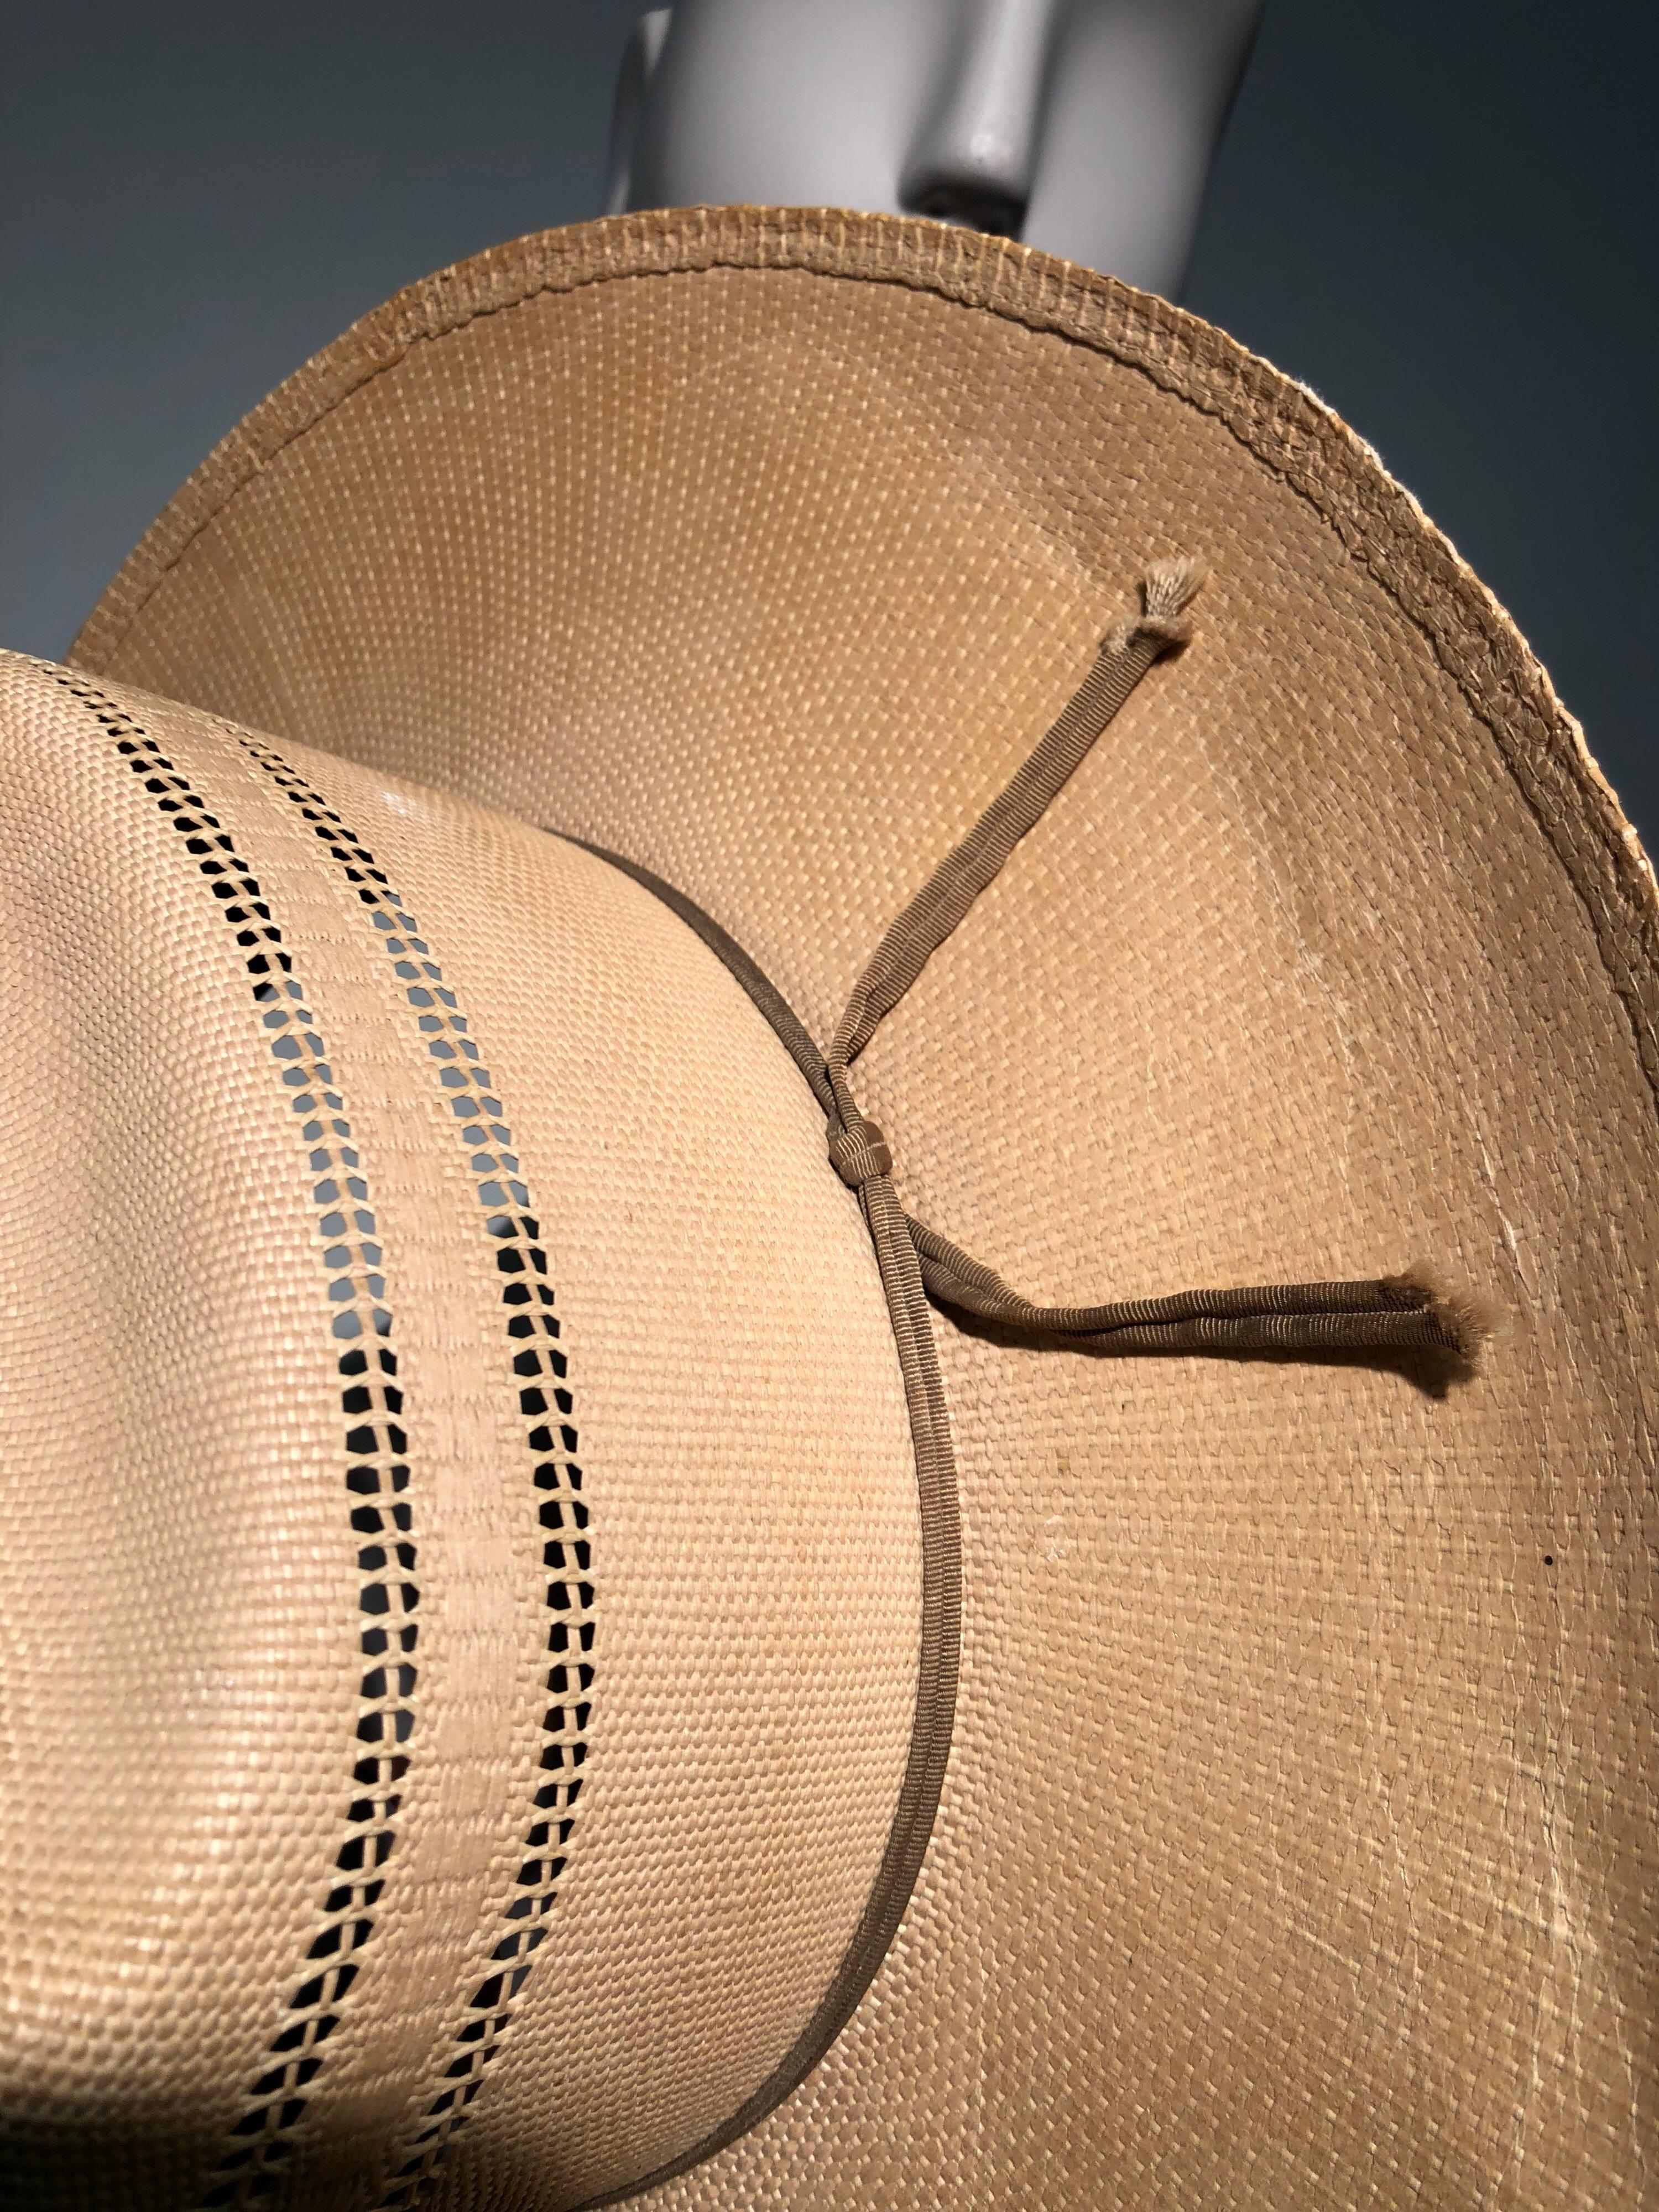 1950s Resistol Woven Straw Cowboy Western Hat W/ Leather Chin Strap 2